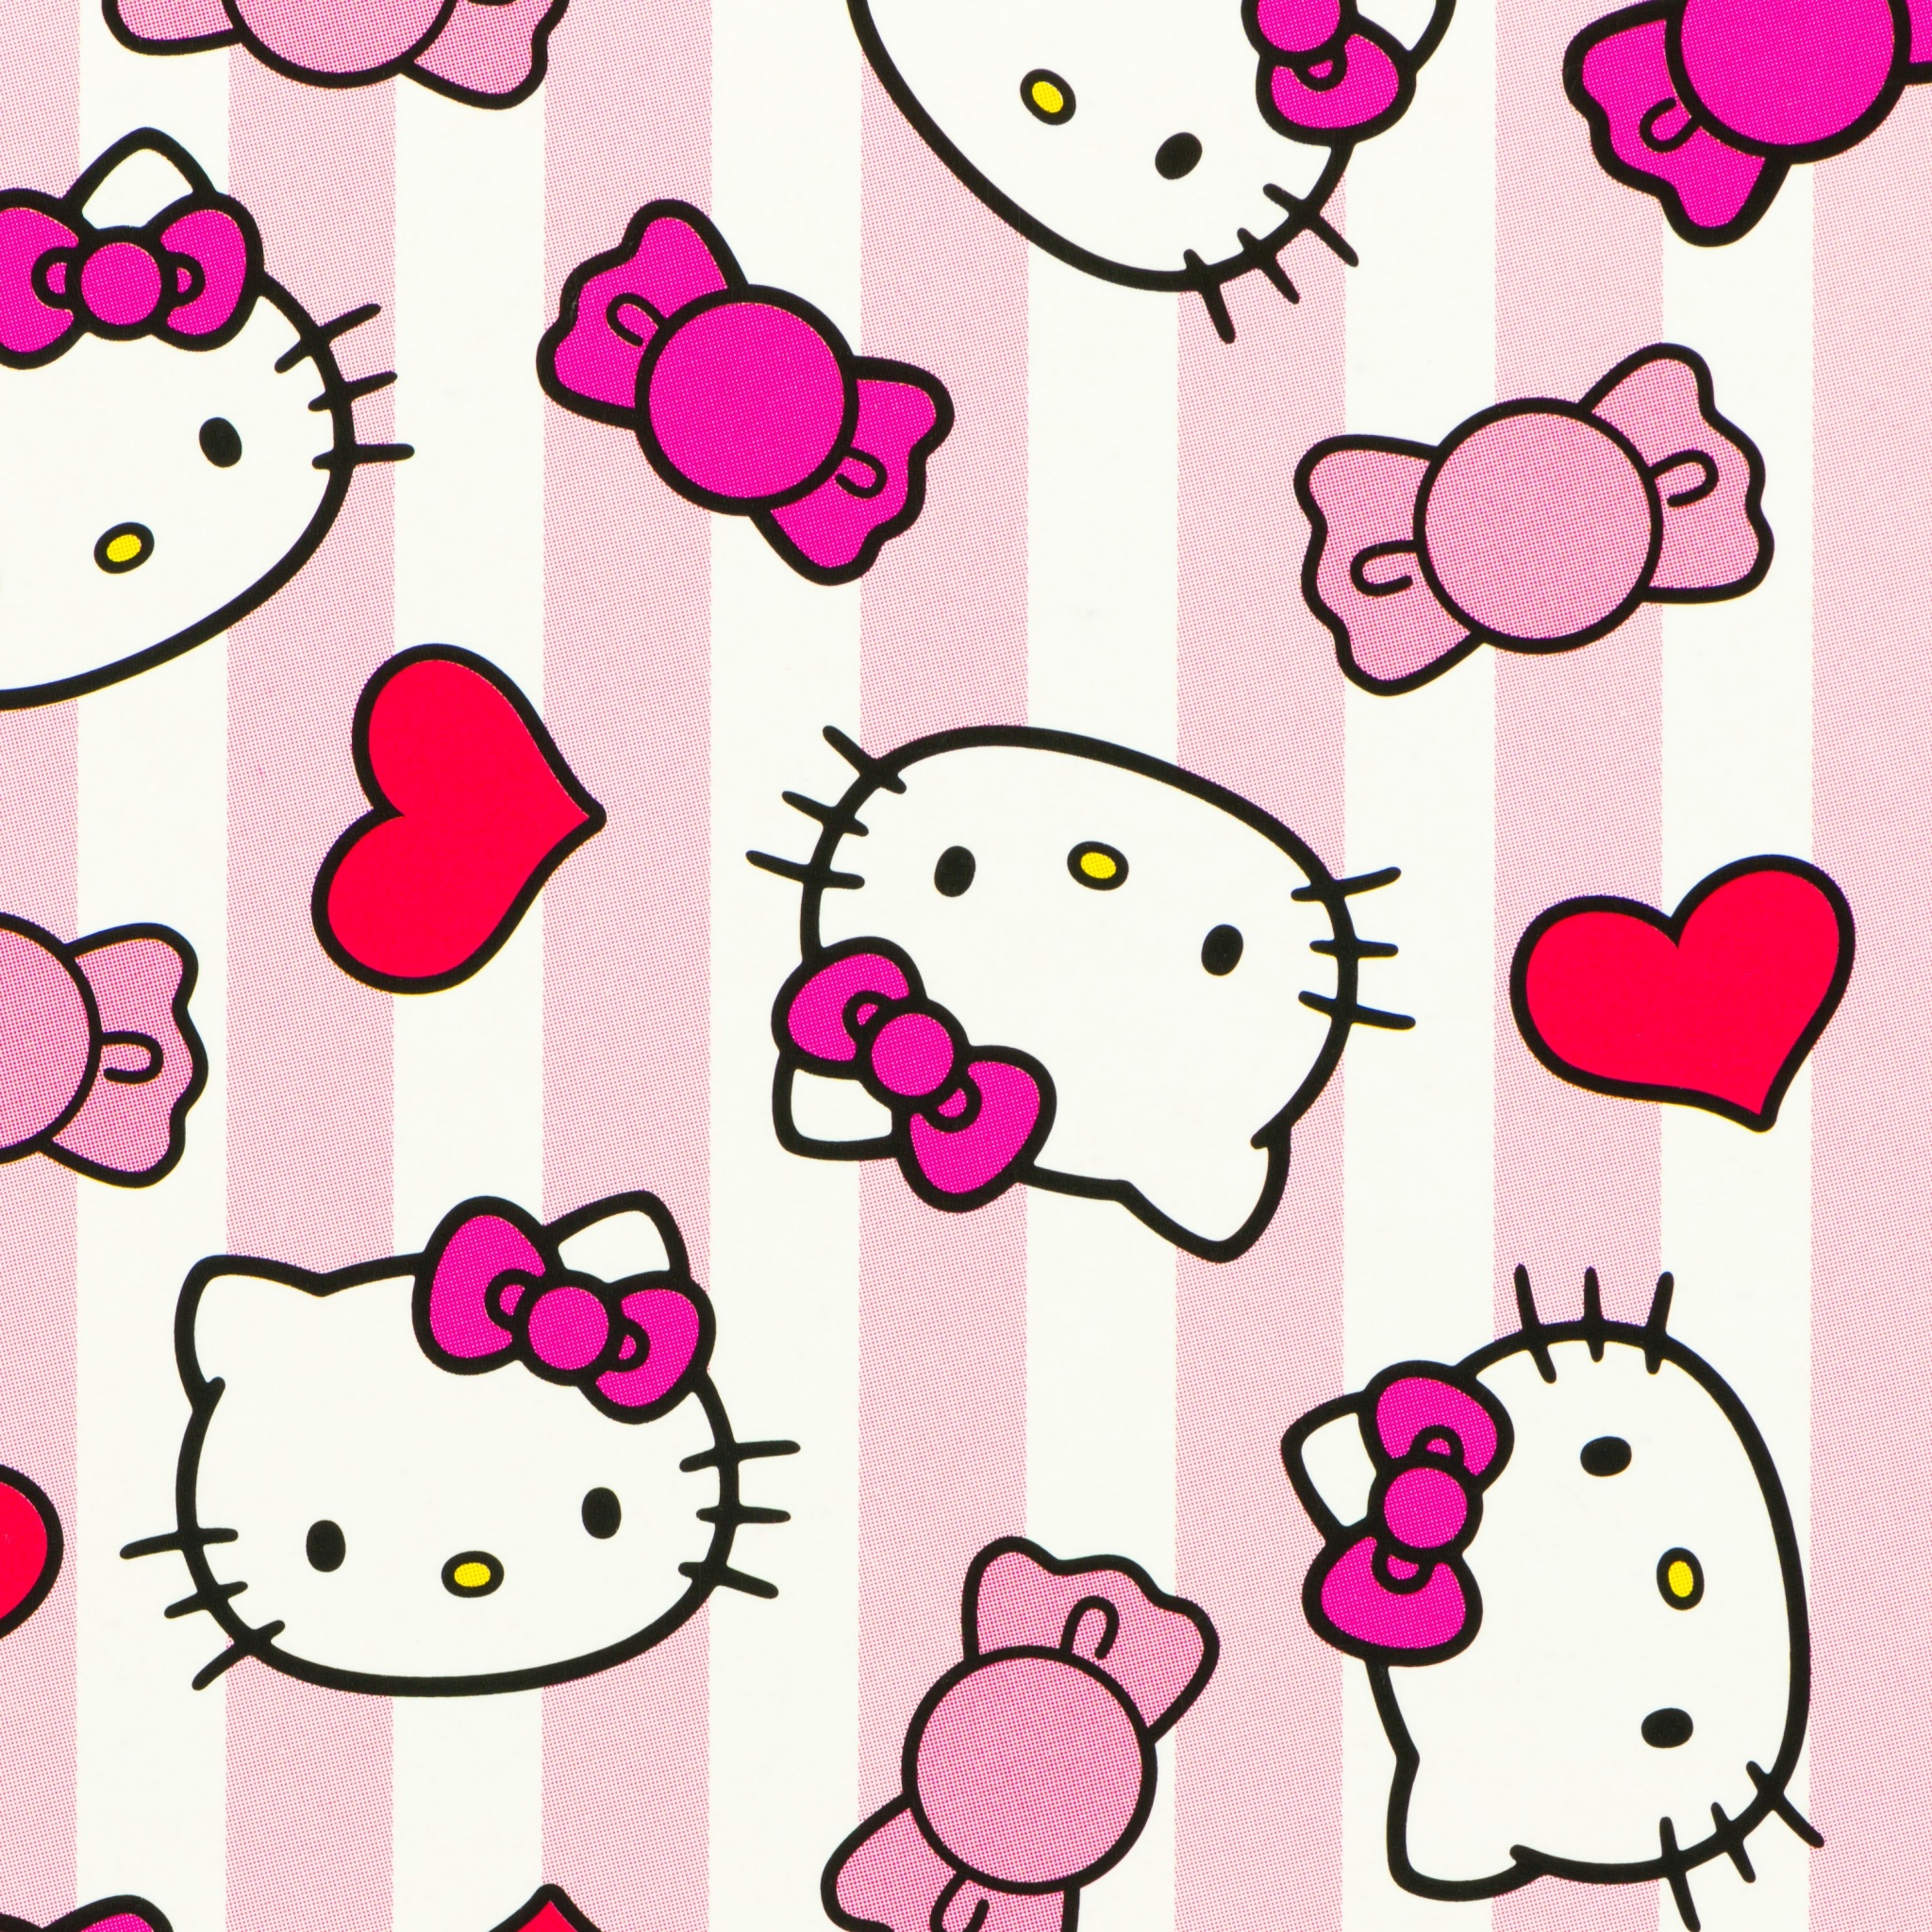 Cute Hello Kitty  Pink Background Wallpaper Download  MobCup